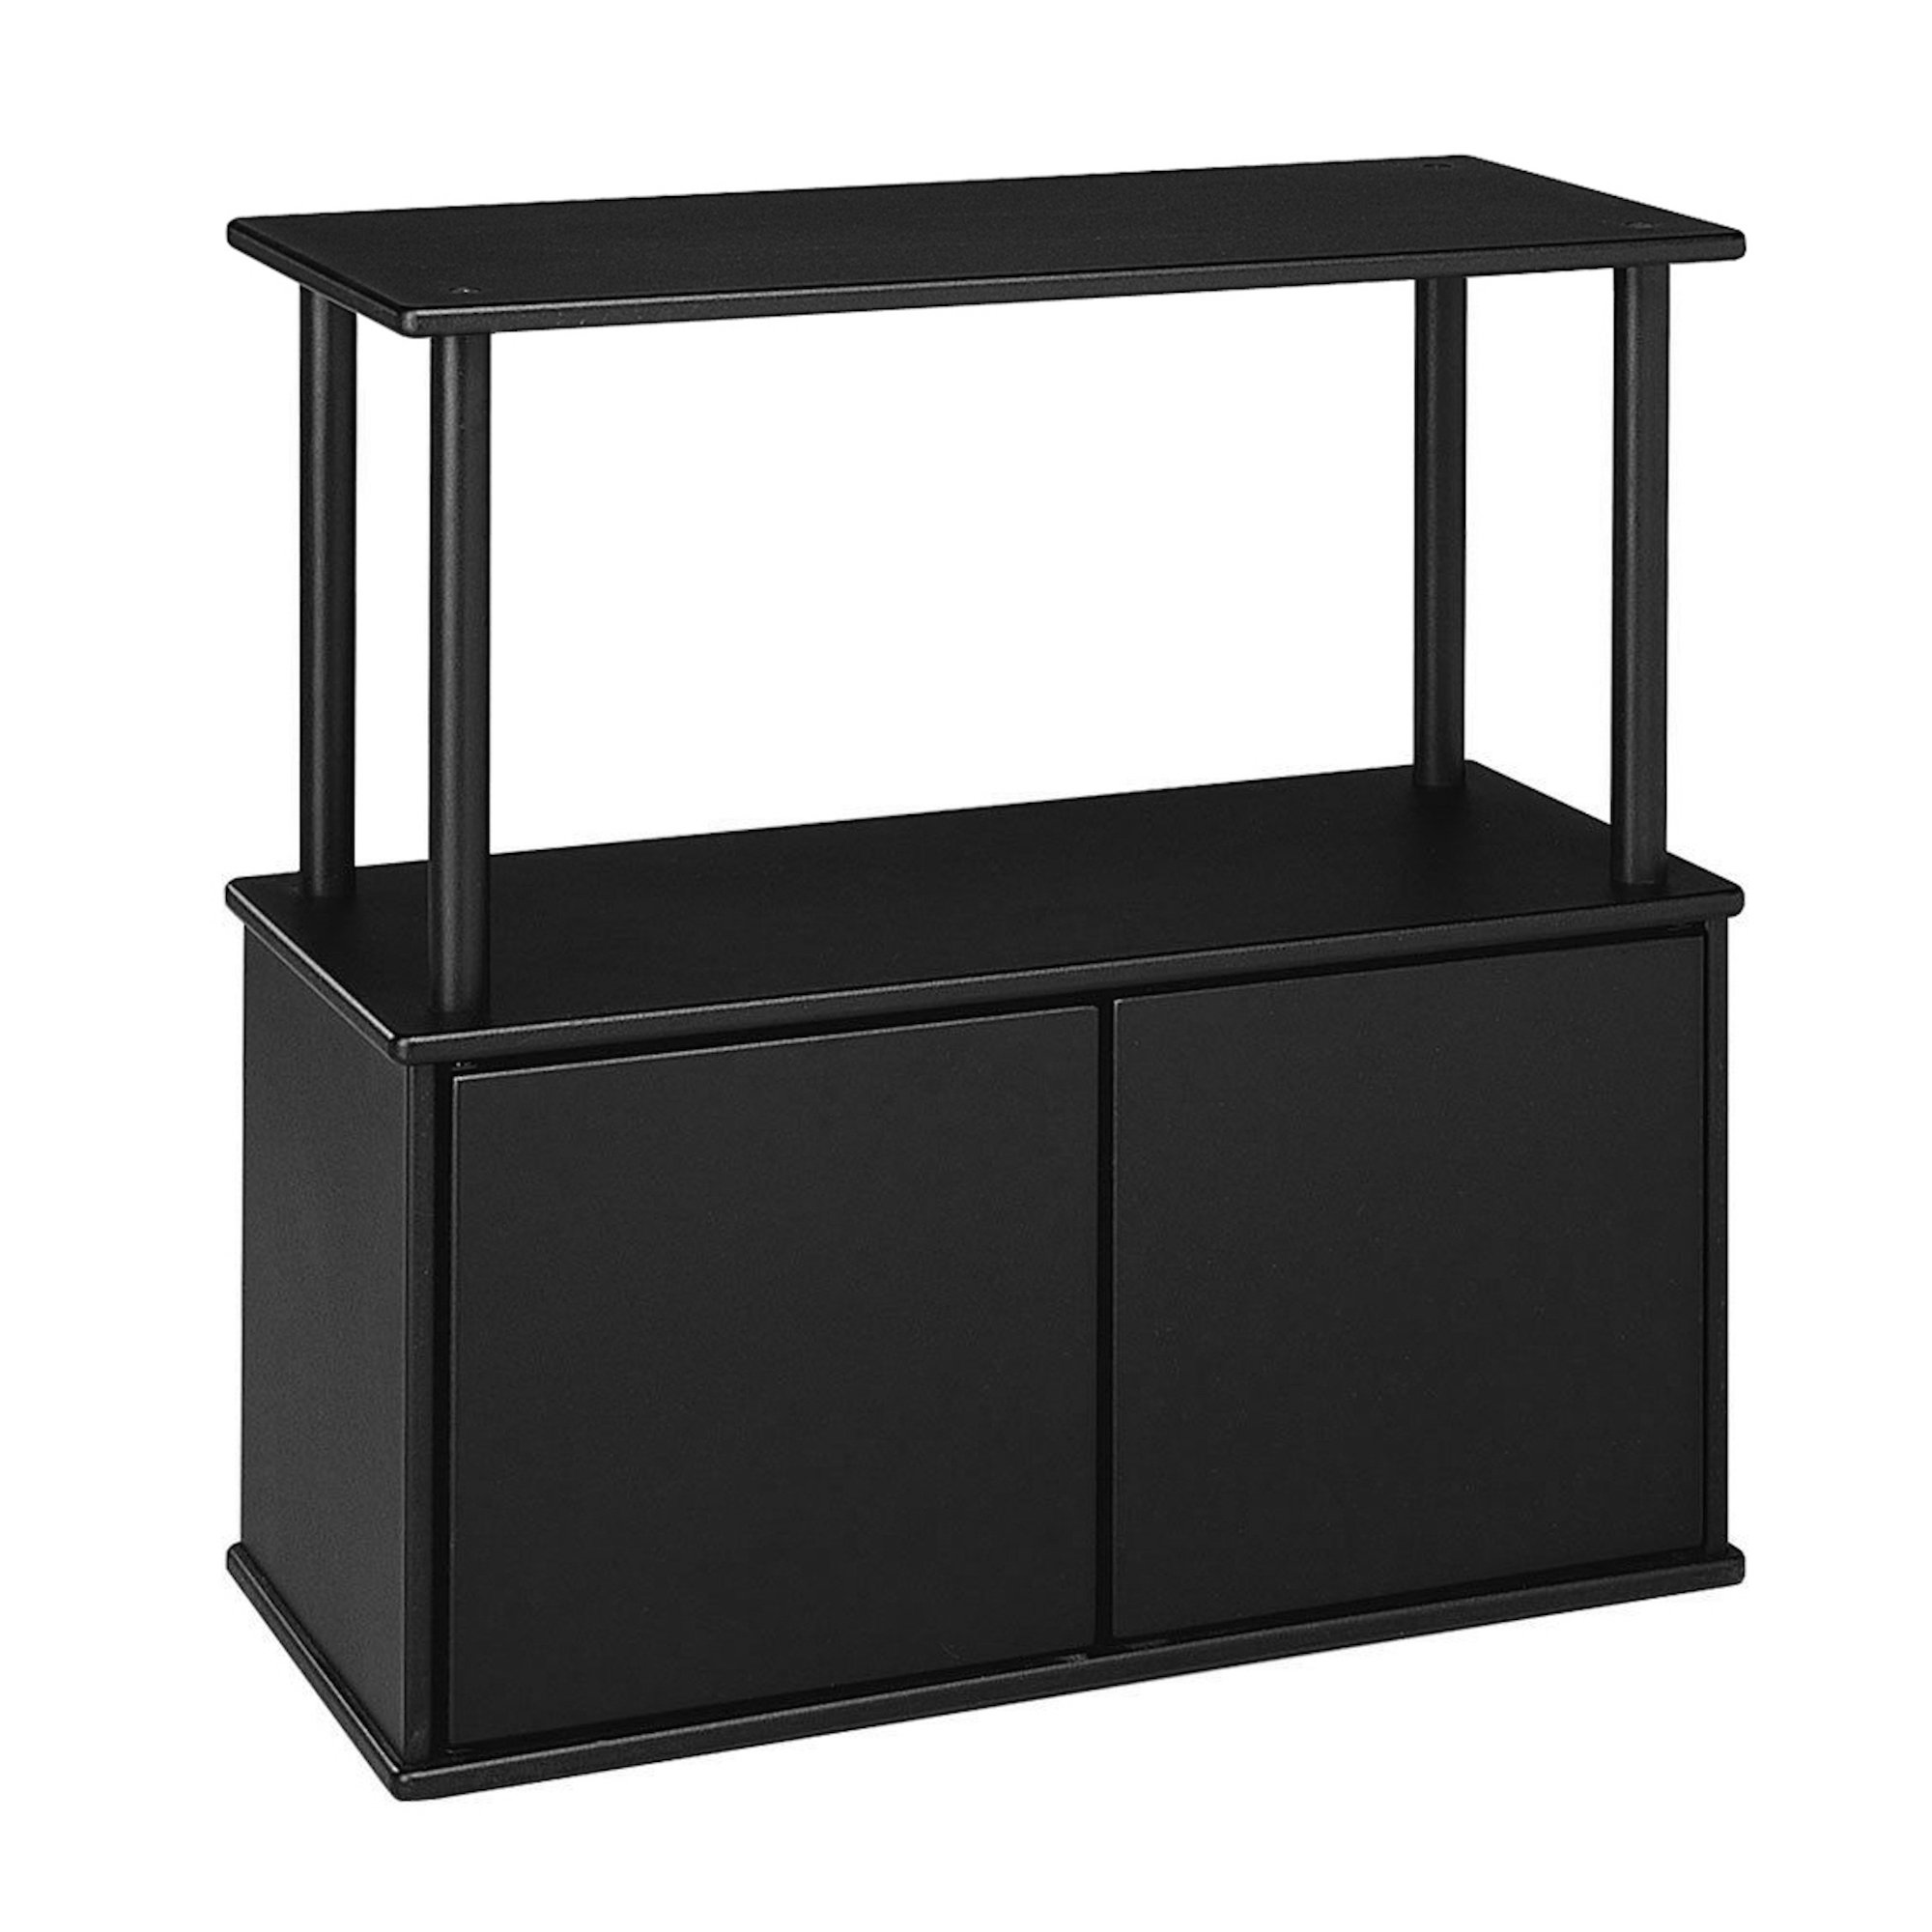 UPC 664255000064 product image for Aquatic Fundamentals 20 and 29 Gallon Aquarium Stand with Storage (Overall: 31